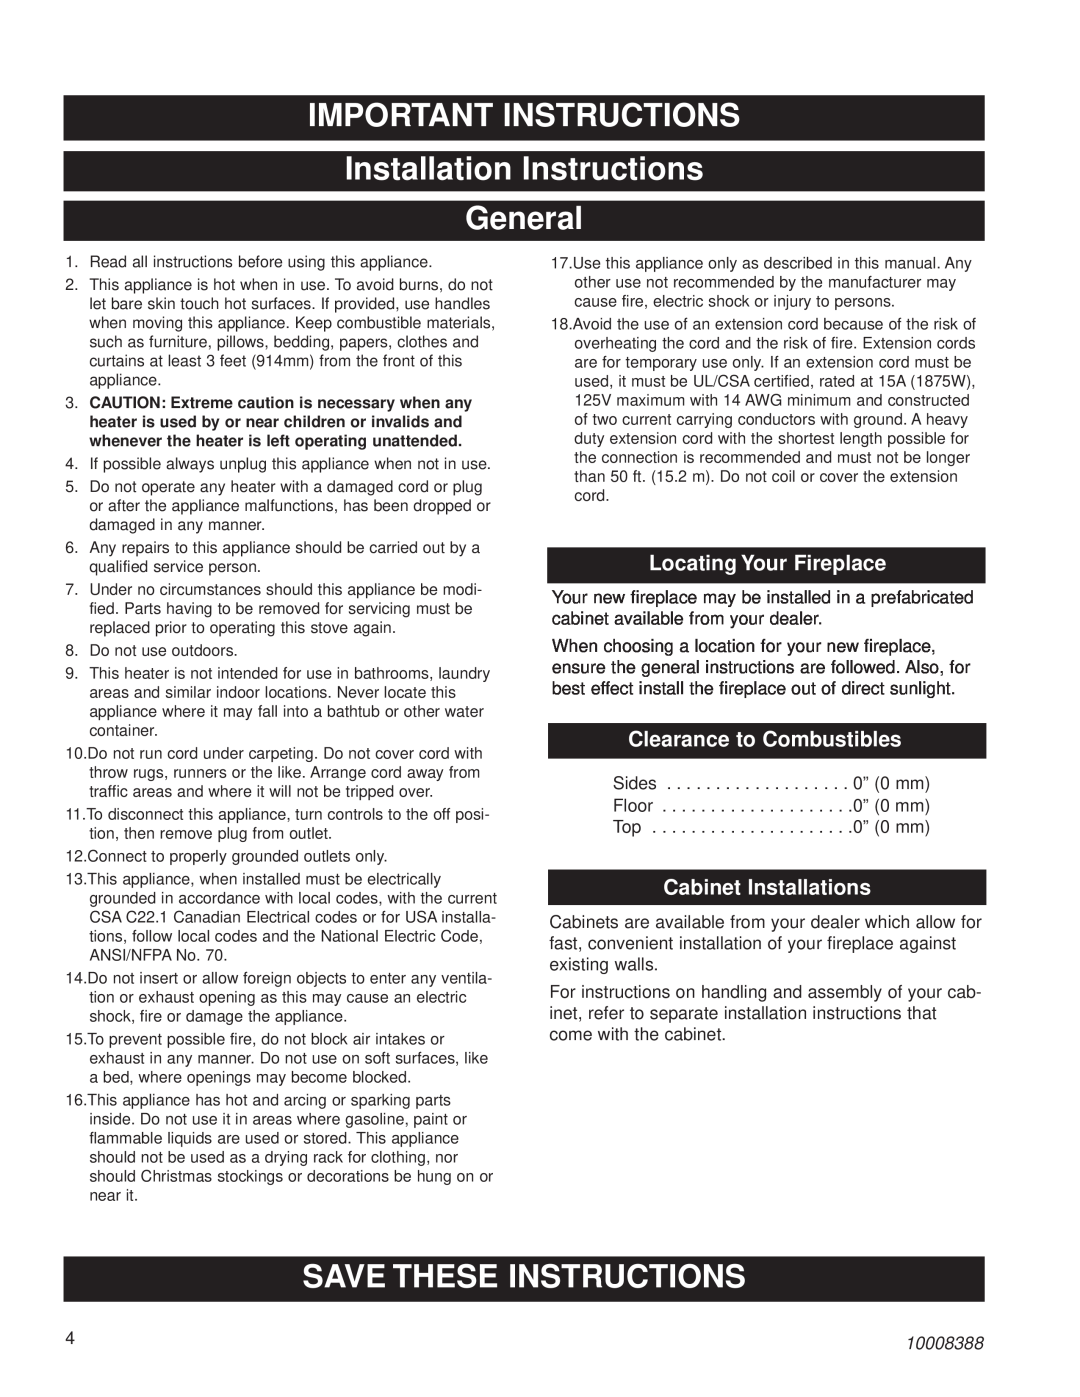 CFM Corporation HEF22 IMPORTANT INSTRUCTIONS Installation Instructions, General, Save These Instructions, 10008388 